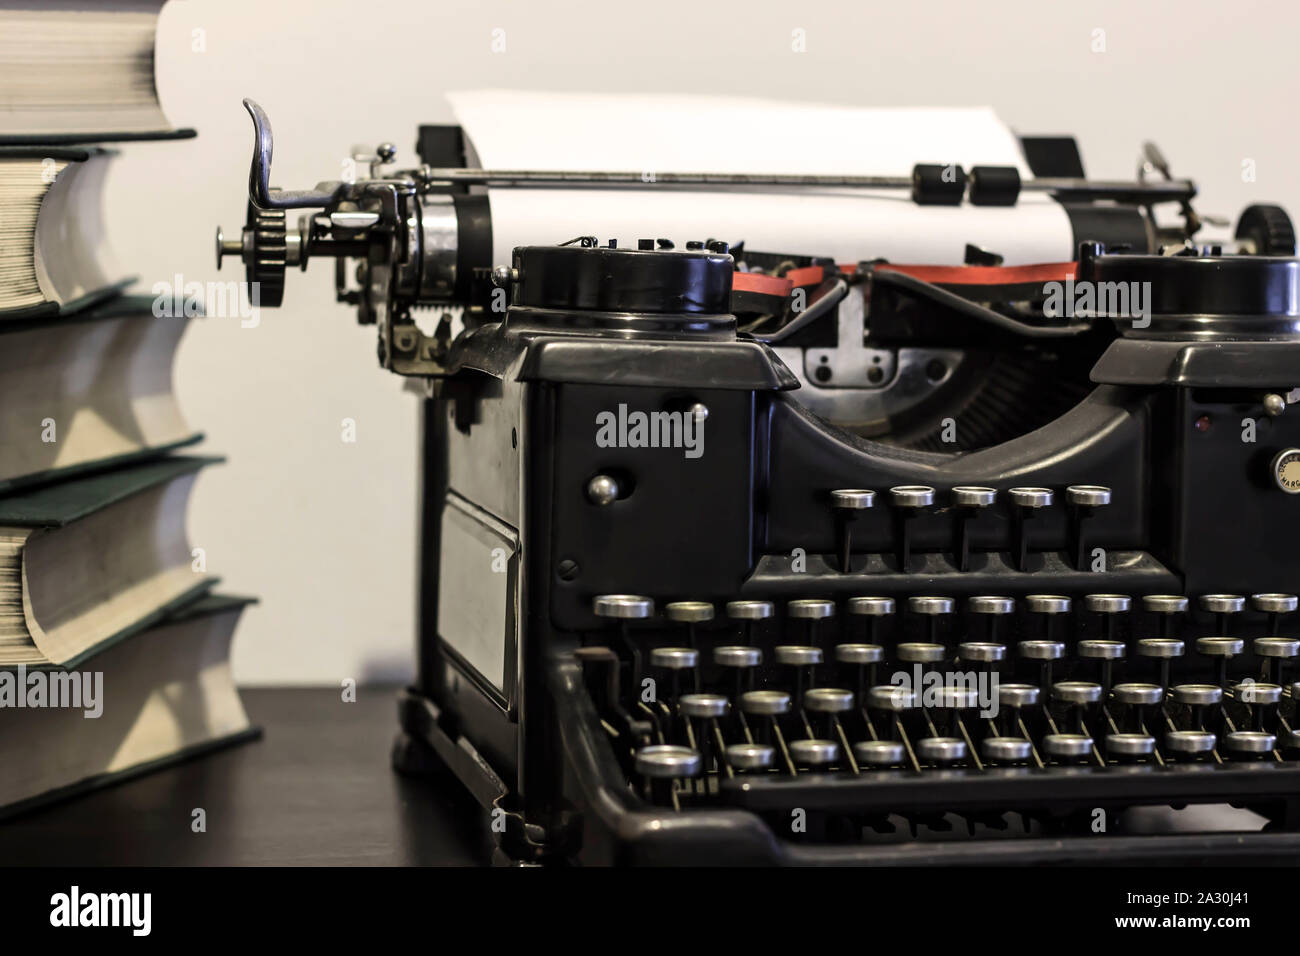 Vintage typewriter machine with paper Stock Vector by ©avlntn 99336376